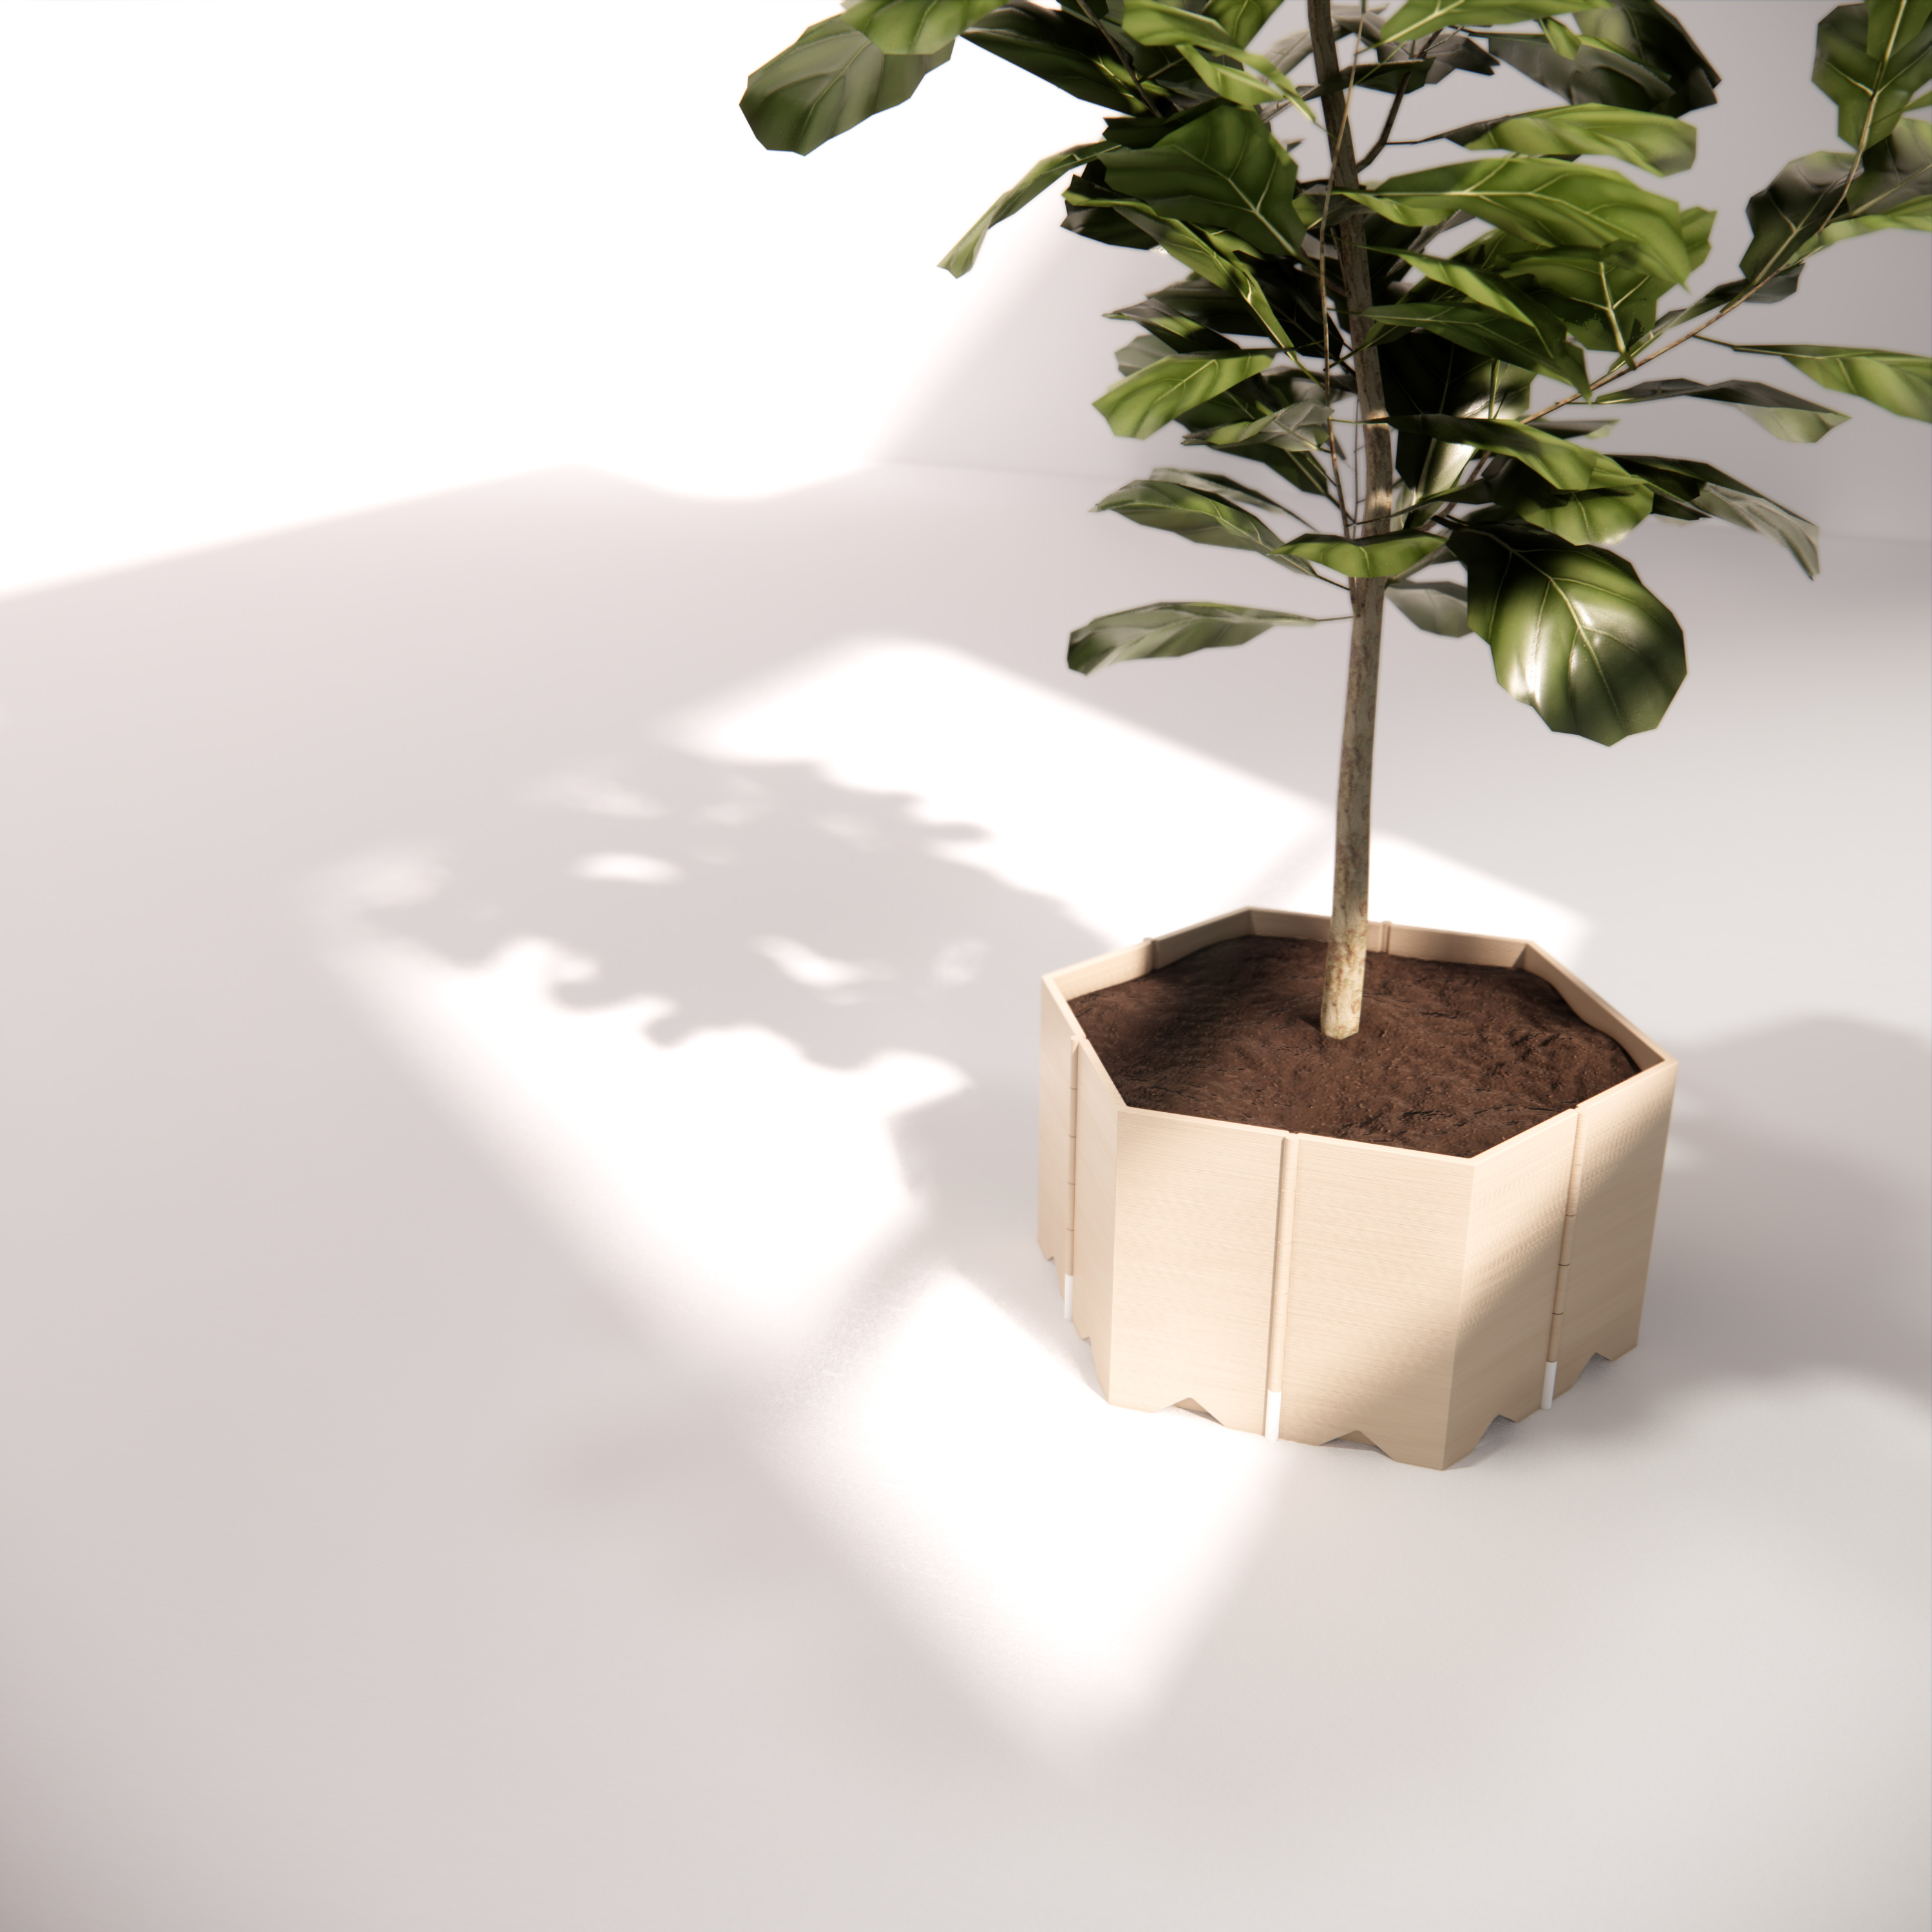 Synthesis Planter